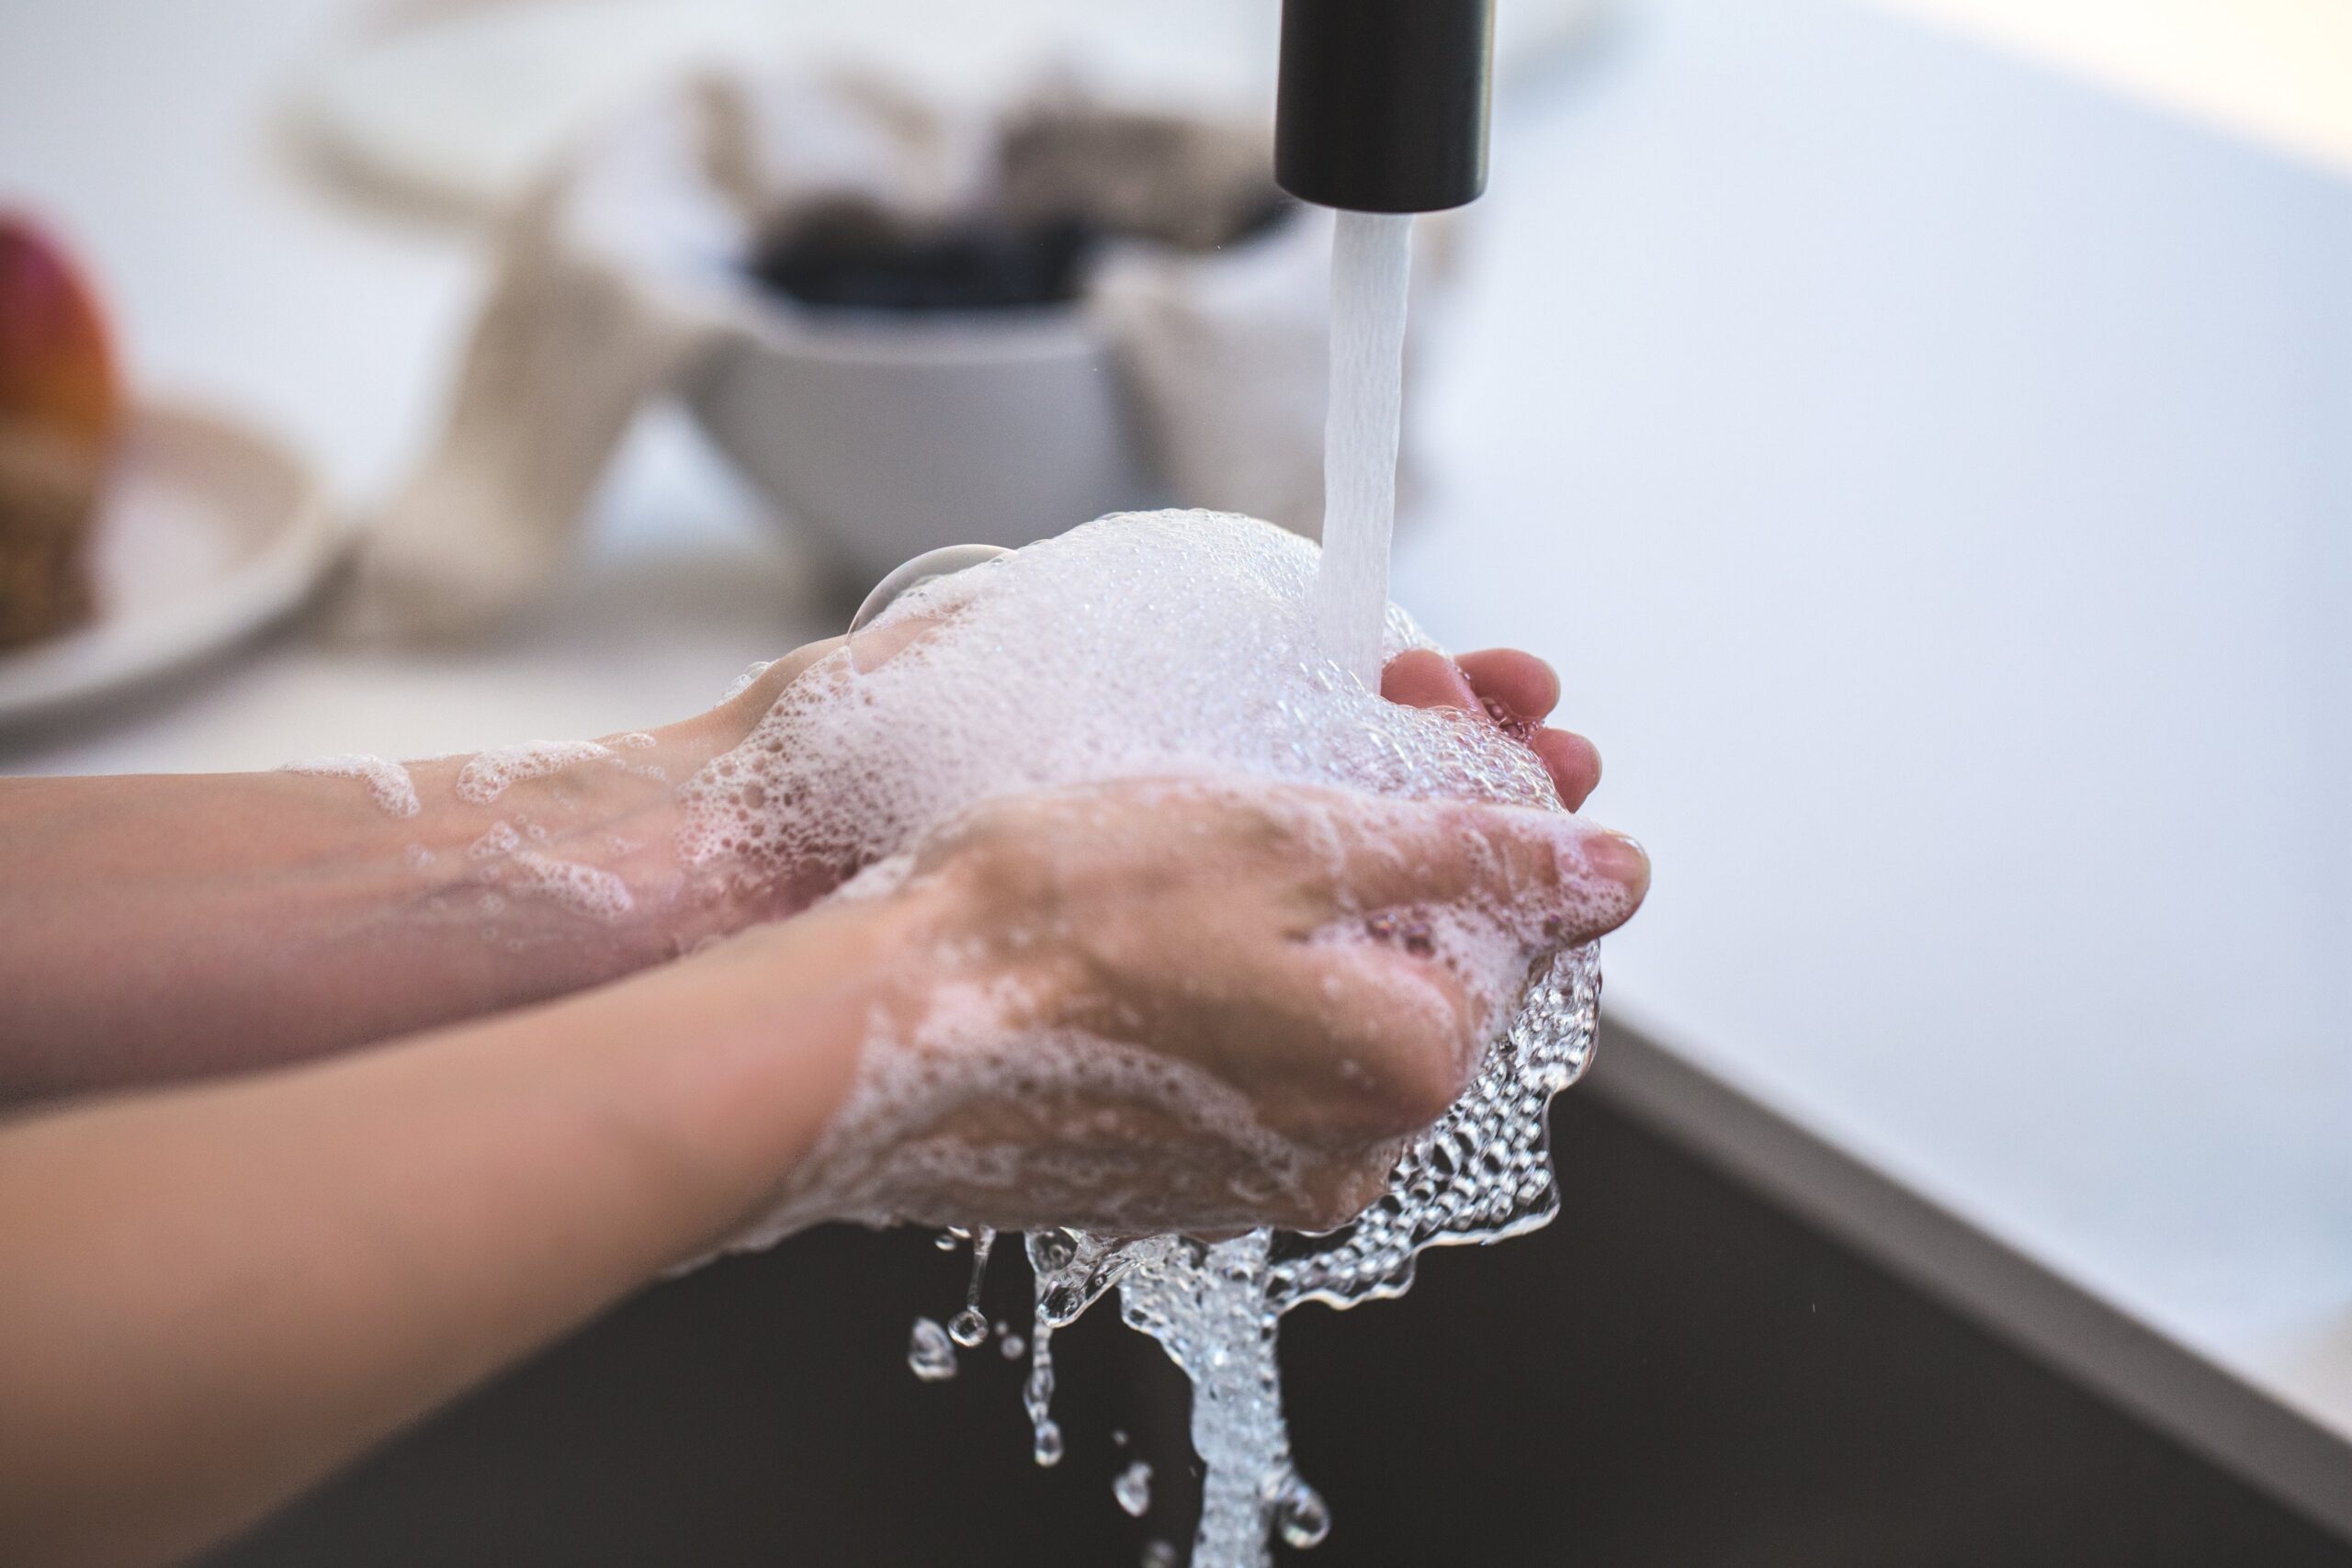 A person washes their hands under a running faucet, lathering with soap suds that drip back into the sink, highlighting cleanliness and hygiene practices essential for preventing COVID-19 transmission.